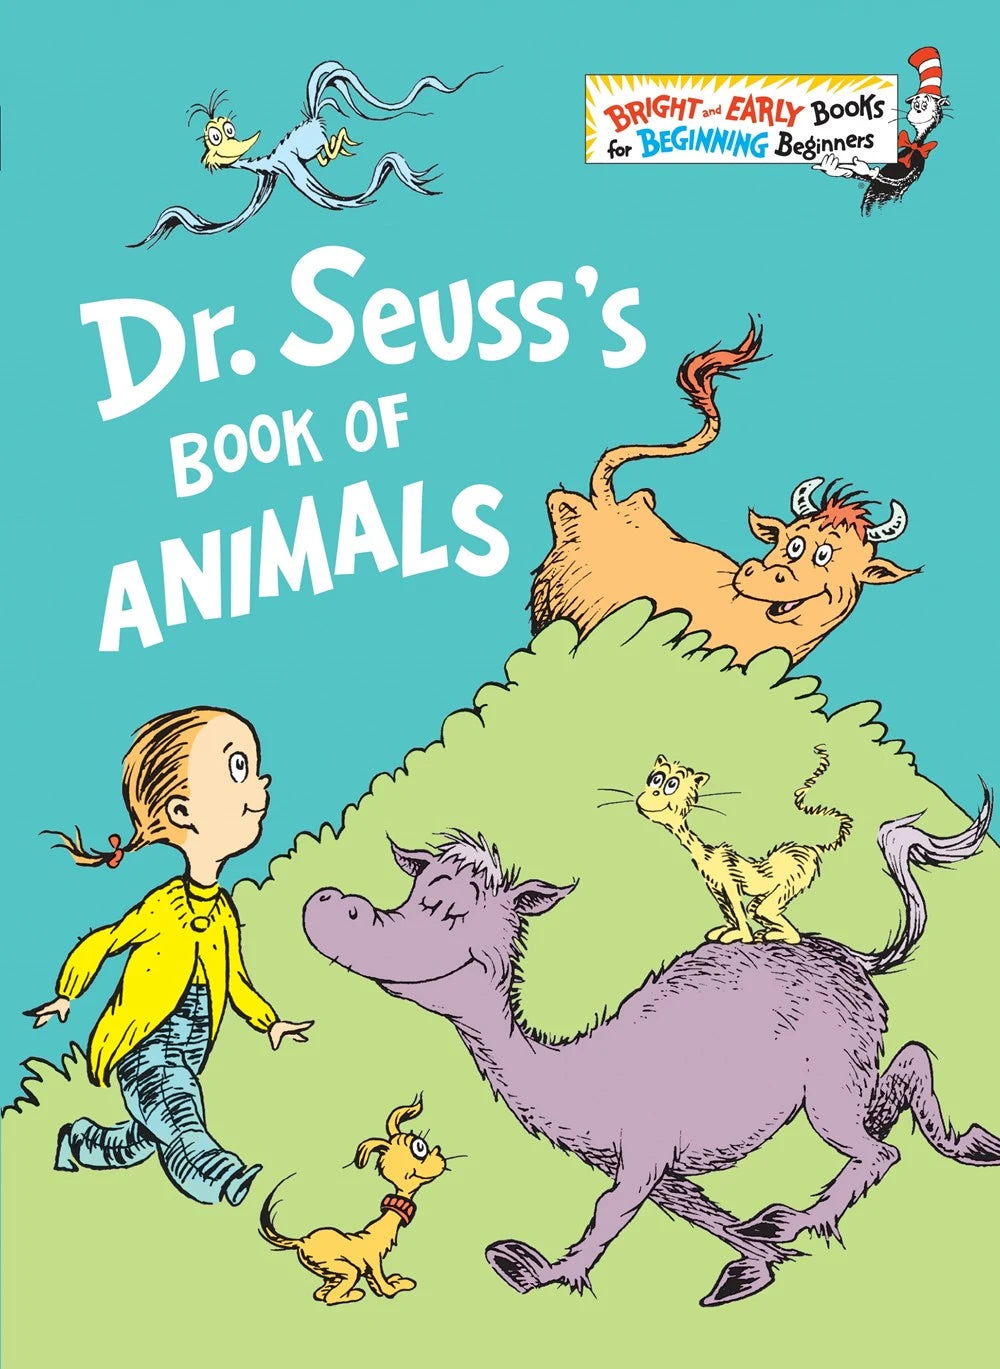 Dr. Seuss's Book of Animals - MakoStars Store | English Books and Study Materials